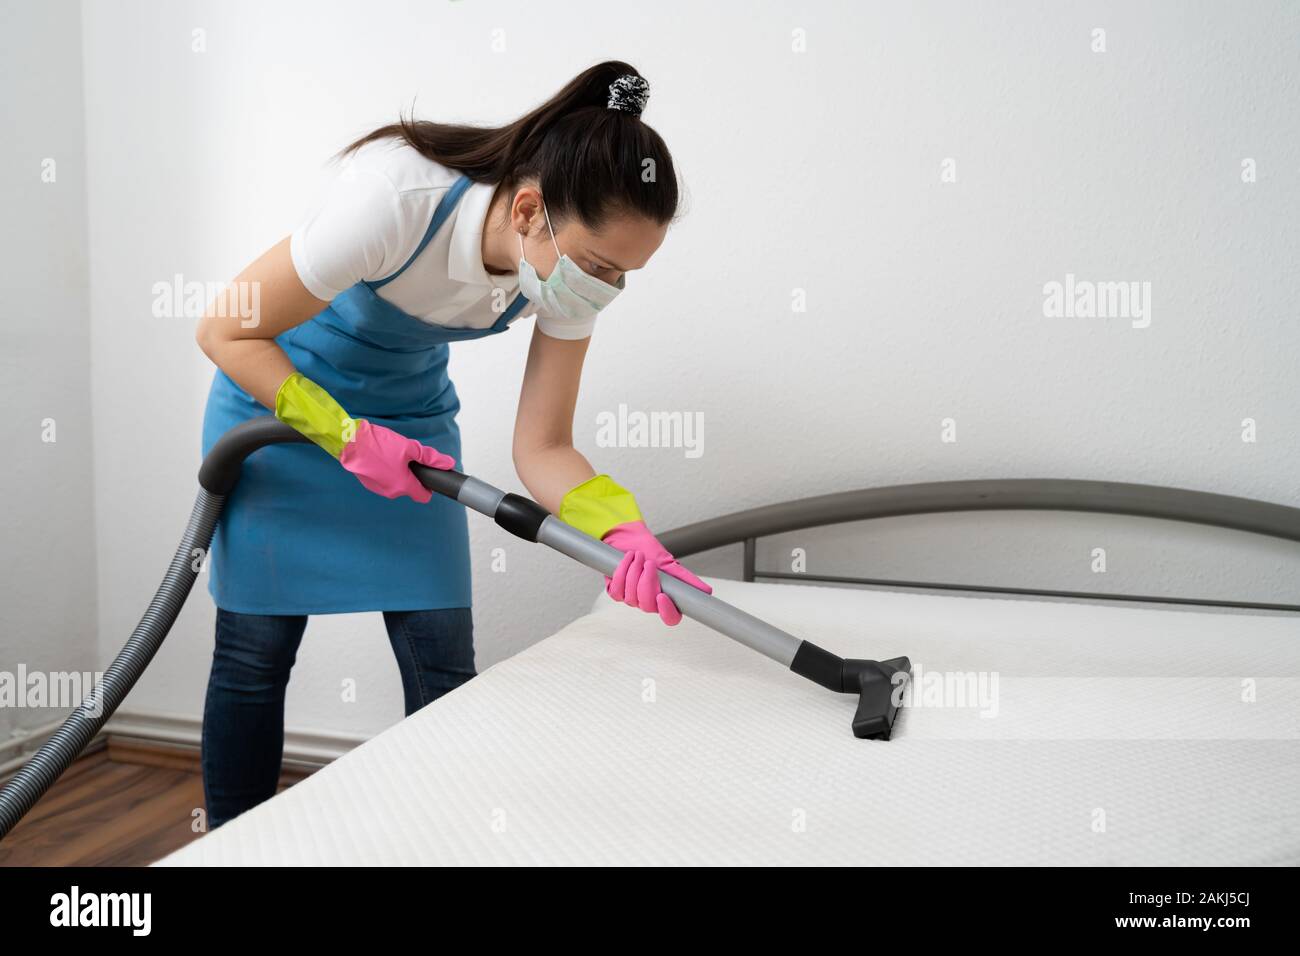 Mattress Cleaning Professional Service By Female Cleaner Using Vacuum Cleaner Stock Photo